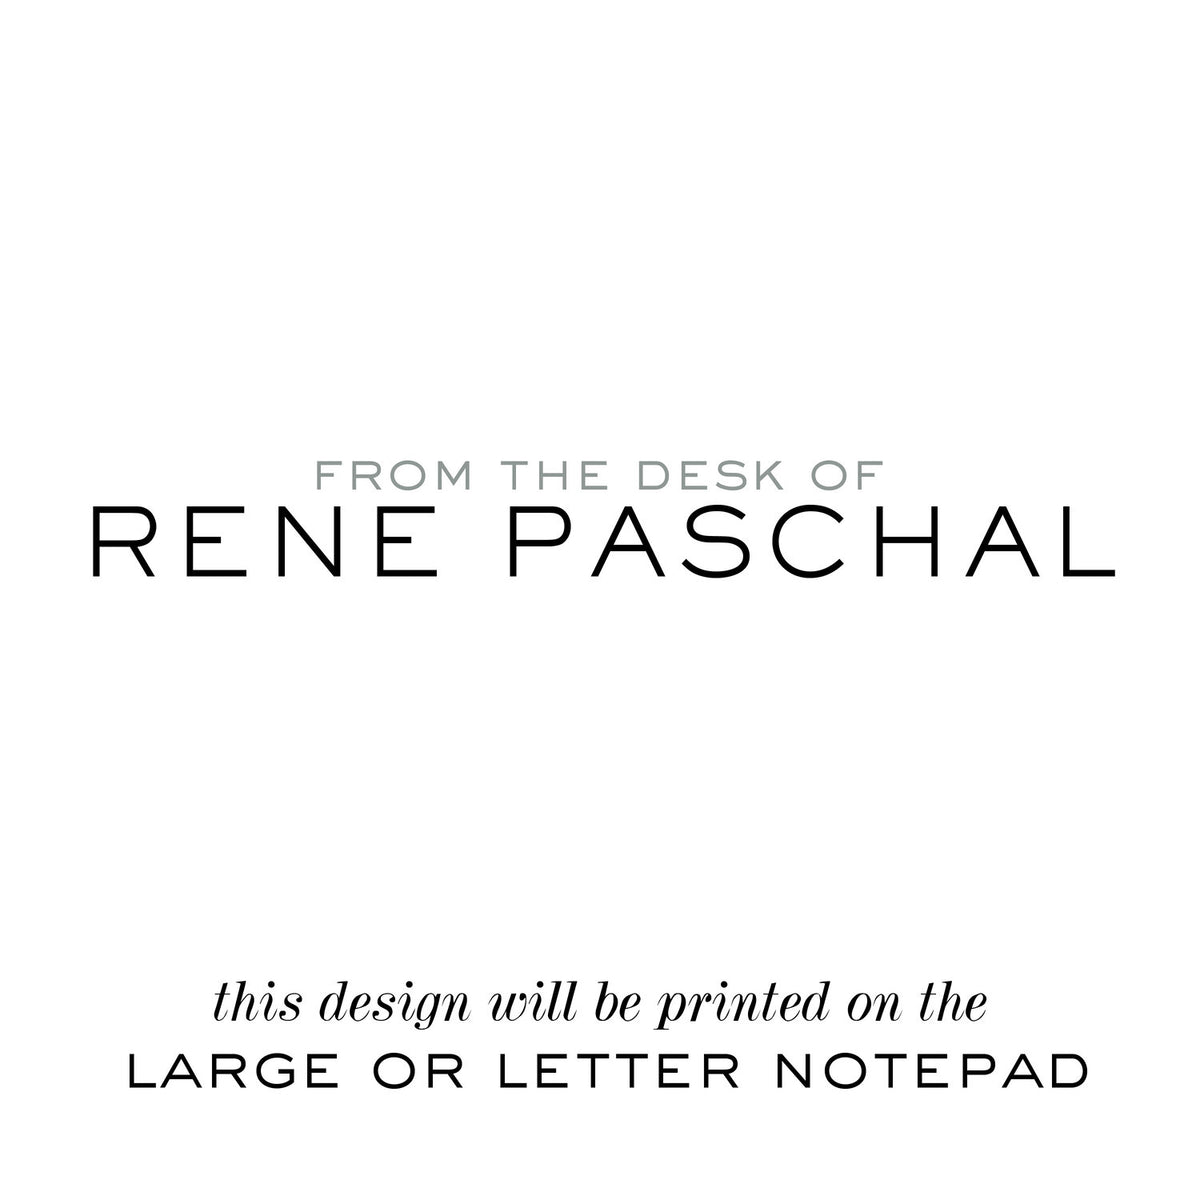 Paschal Personalized Notepad Set